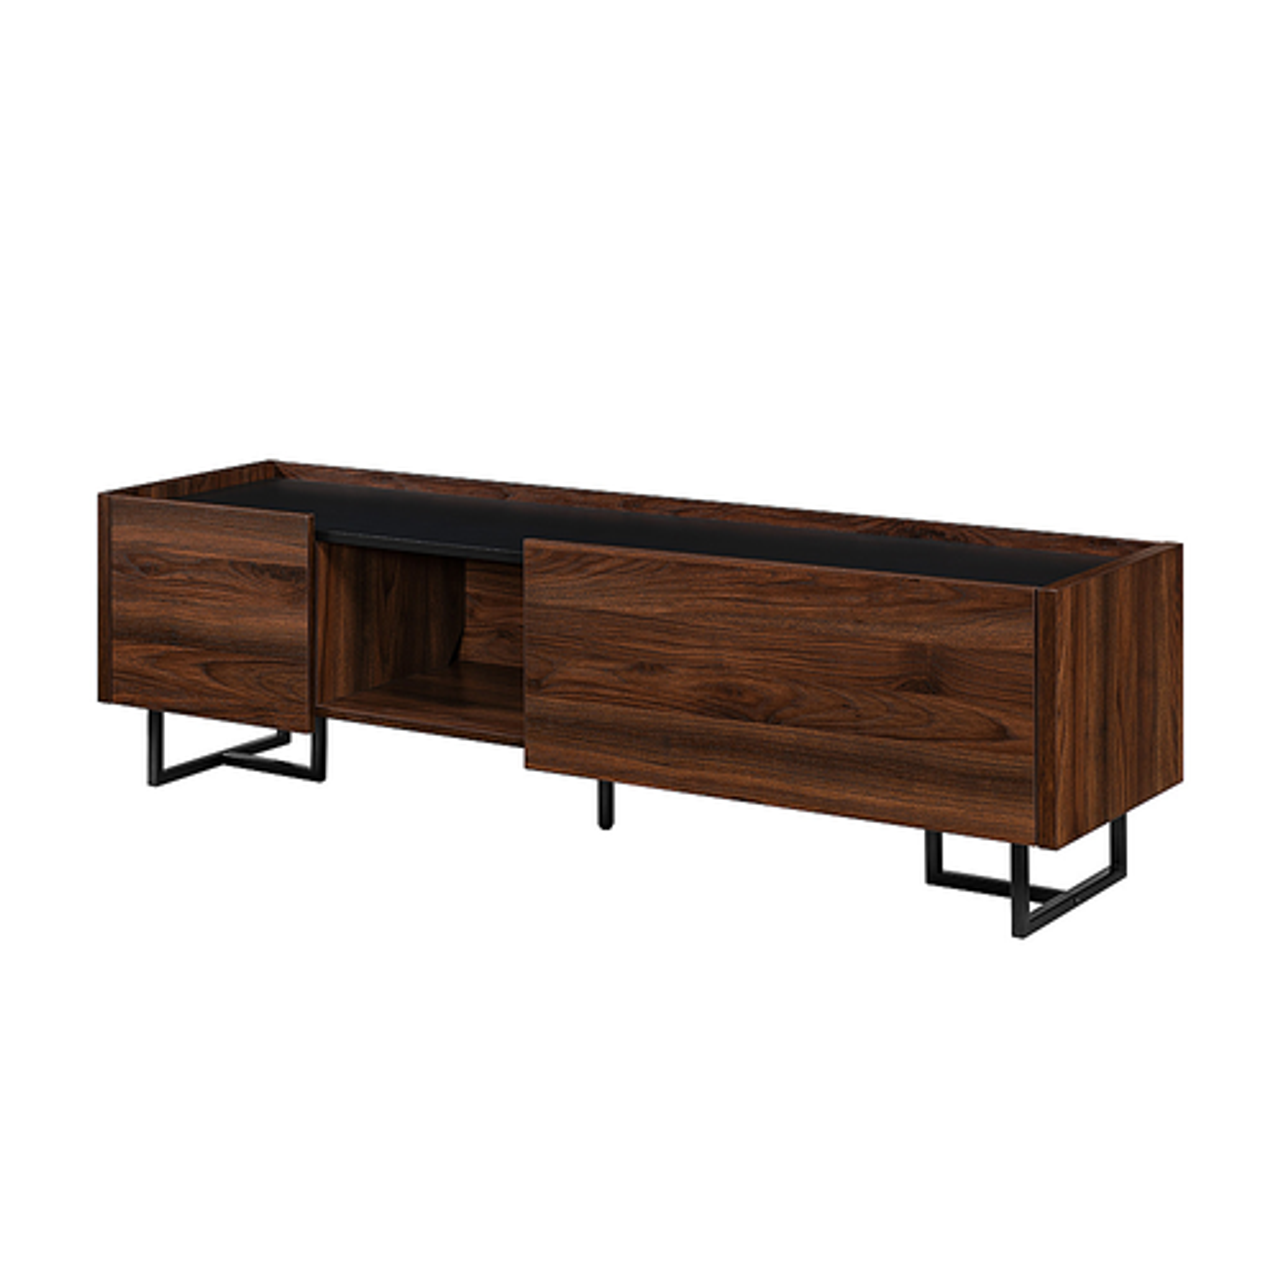 Walker Edison - Contemporary Low TV Stand for TVs up to 65” - Dark Walnut